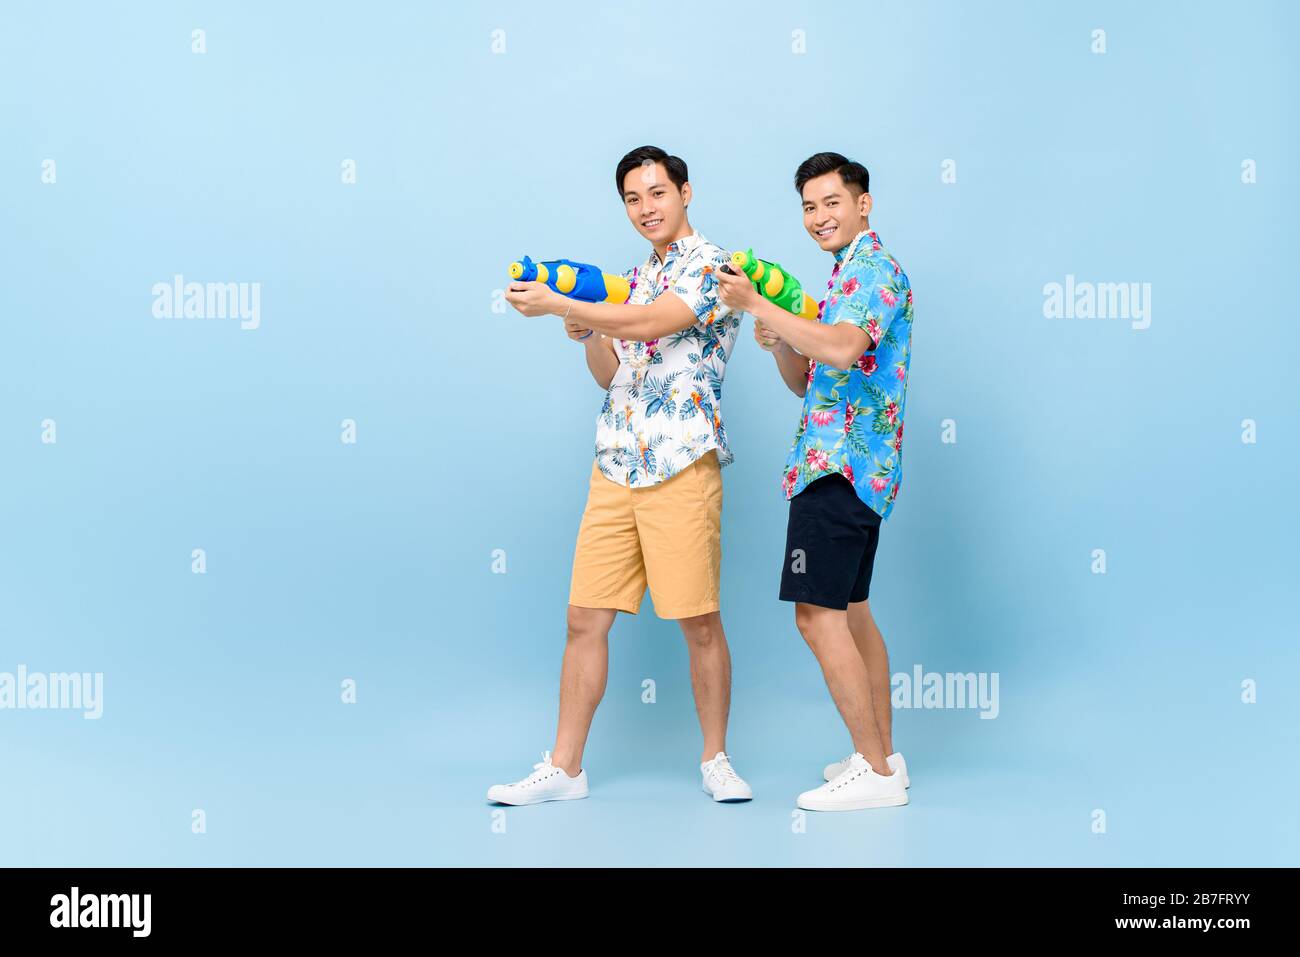 Smilng happy Asian male friends playing with water guns in blue isolated background for Songkran festival in Thailand and southeast Asia Stock Photo